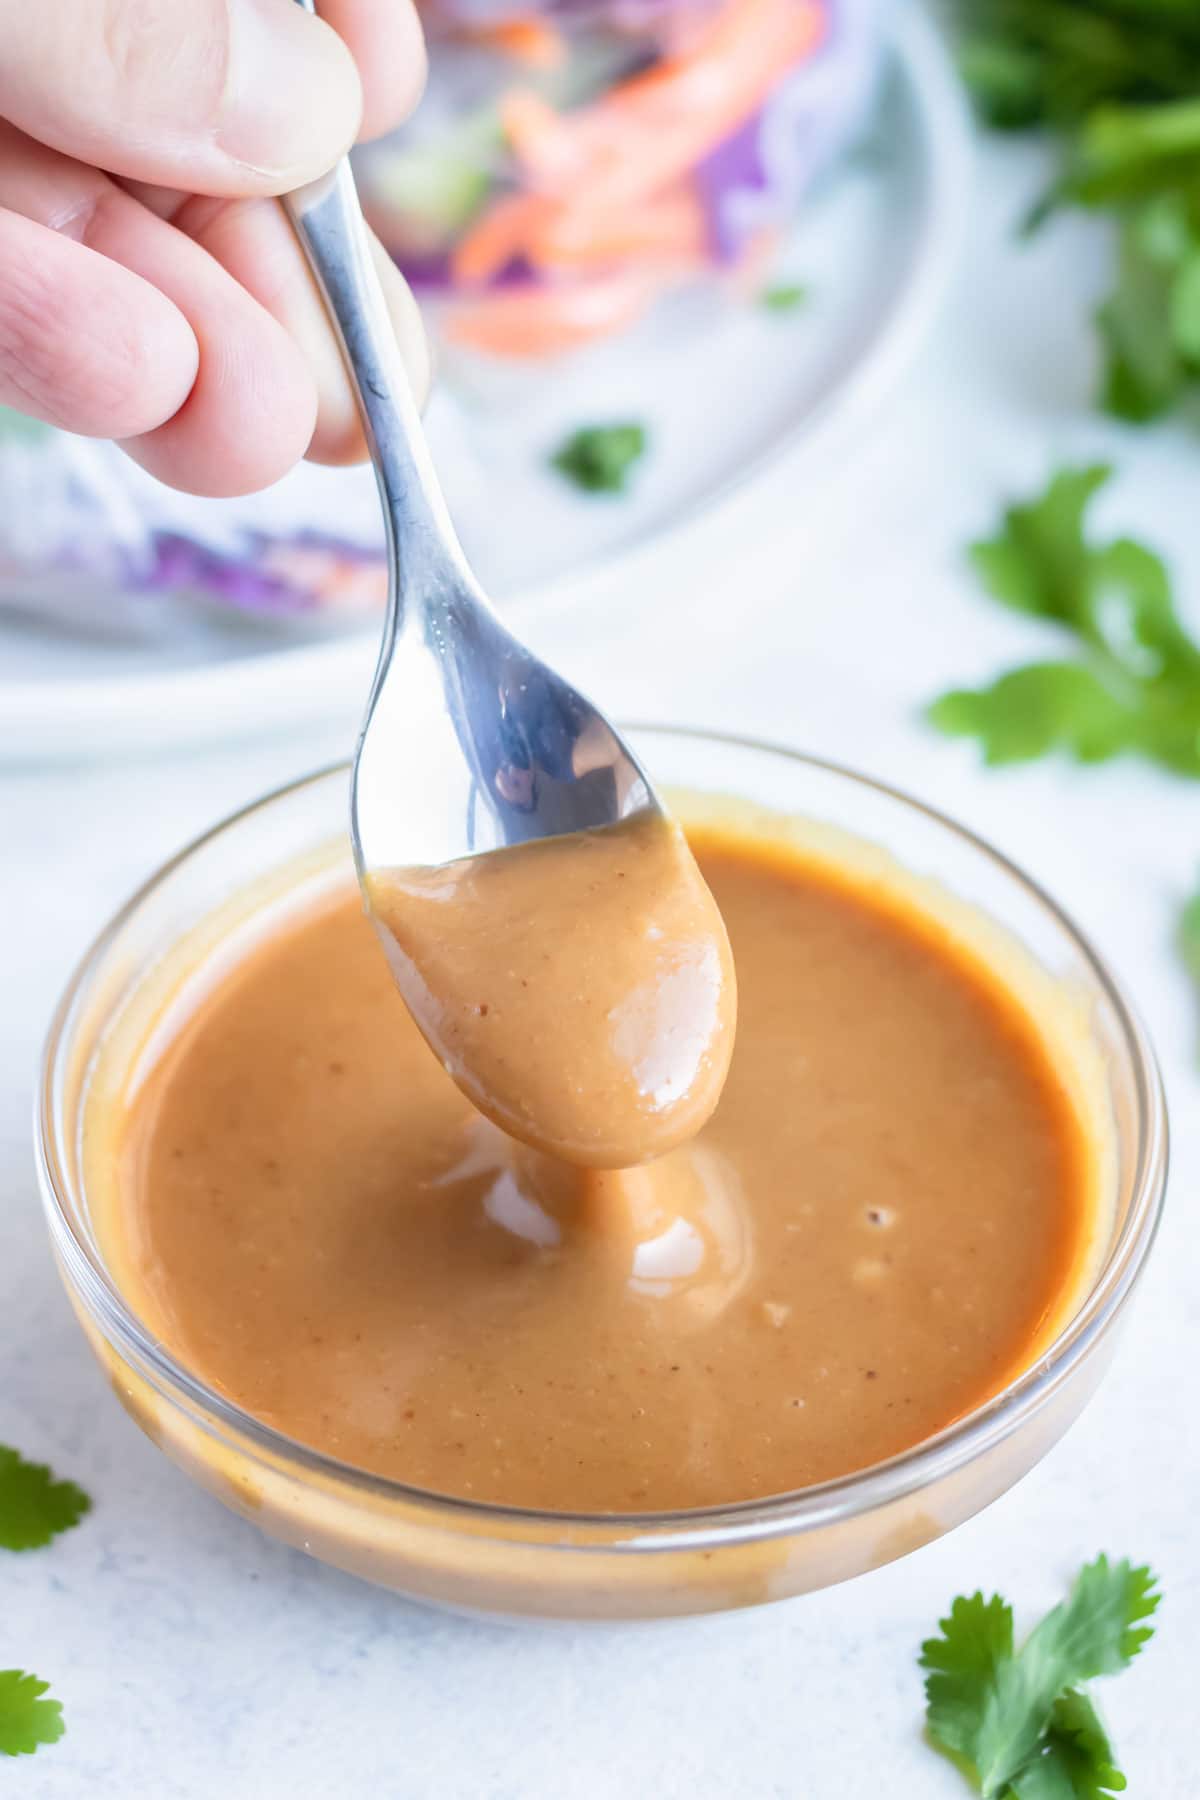 Peanut dipping sauce is dished with a spoon from a glass bowl.